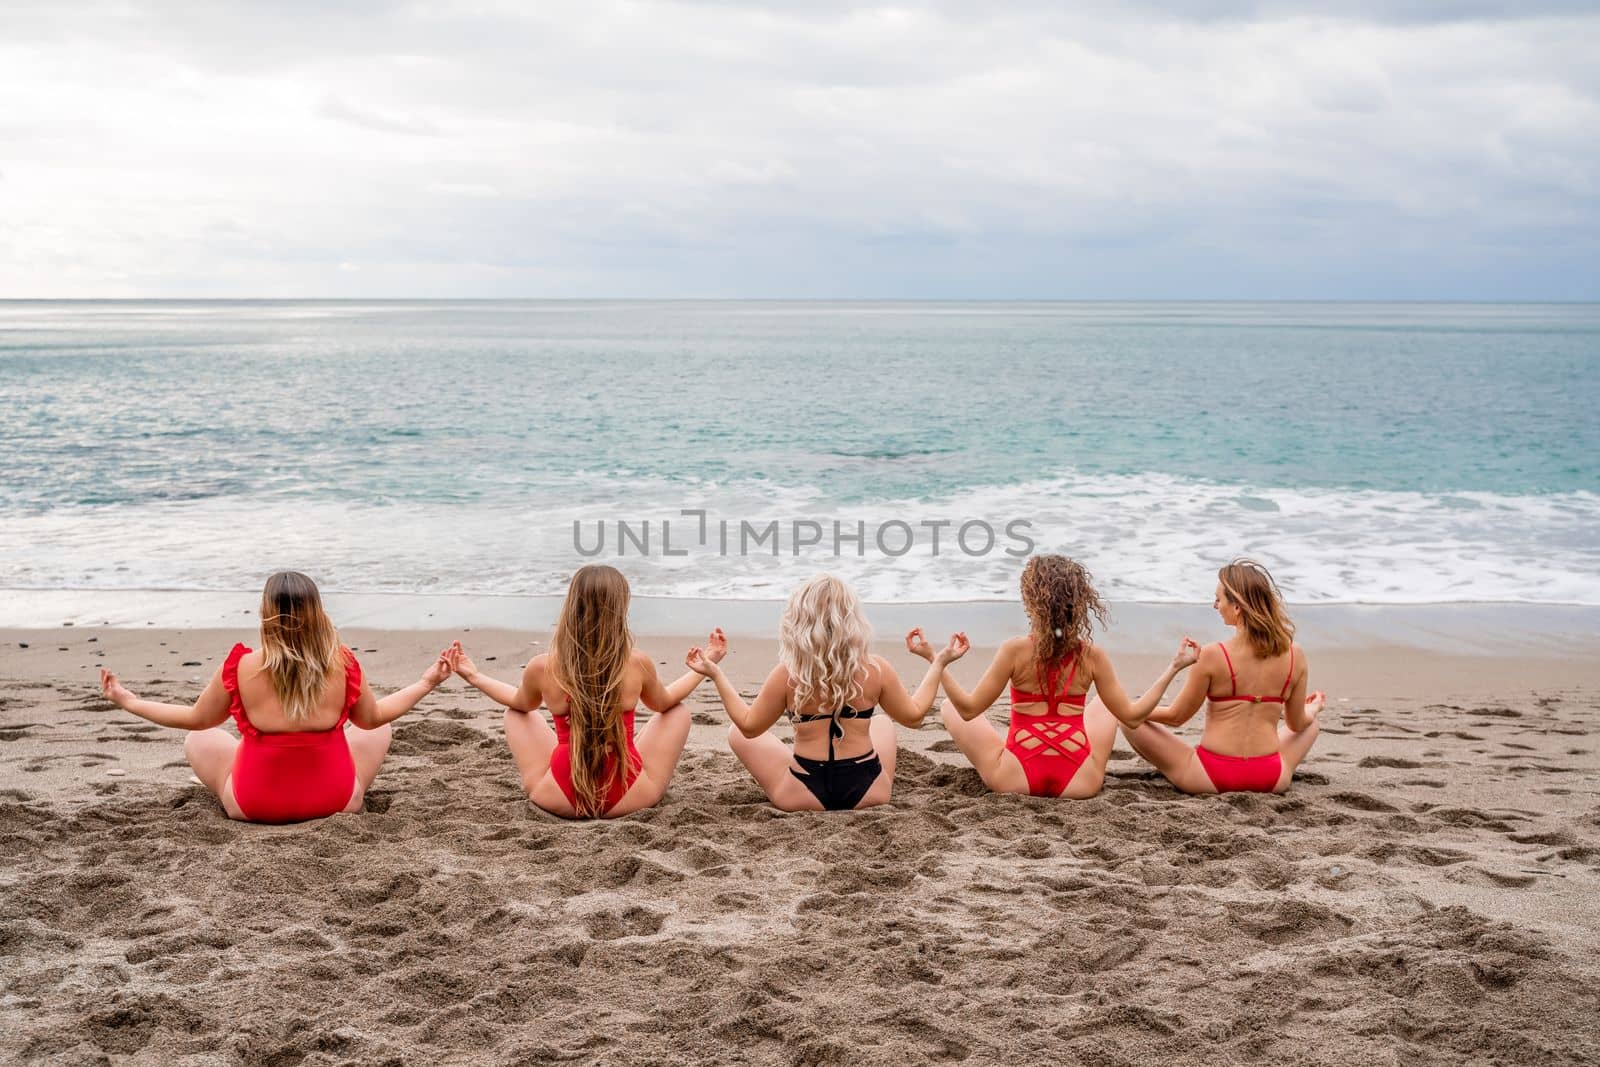 Big happy family or group of five friends is having fun against sunset beach. Beach holidays concept